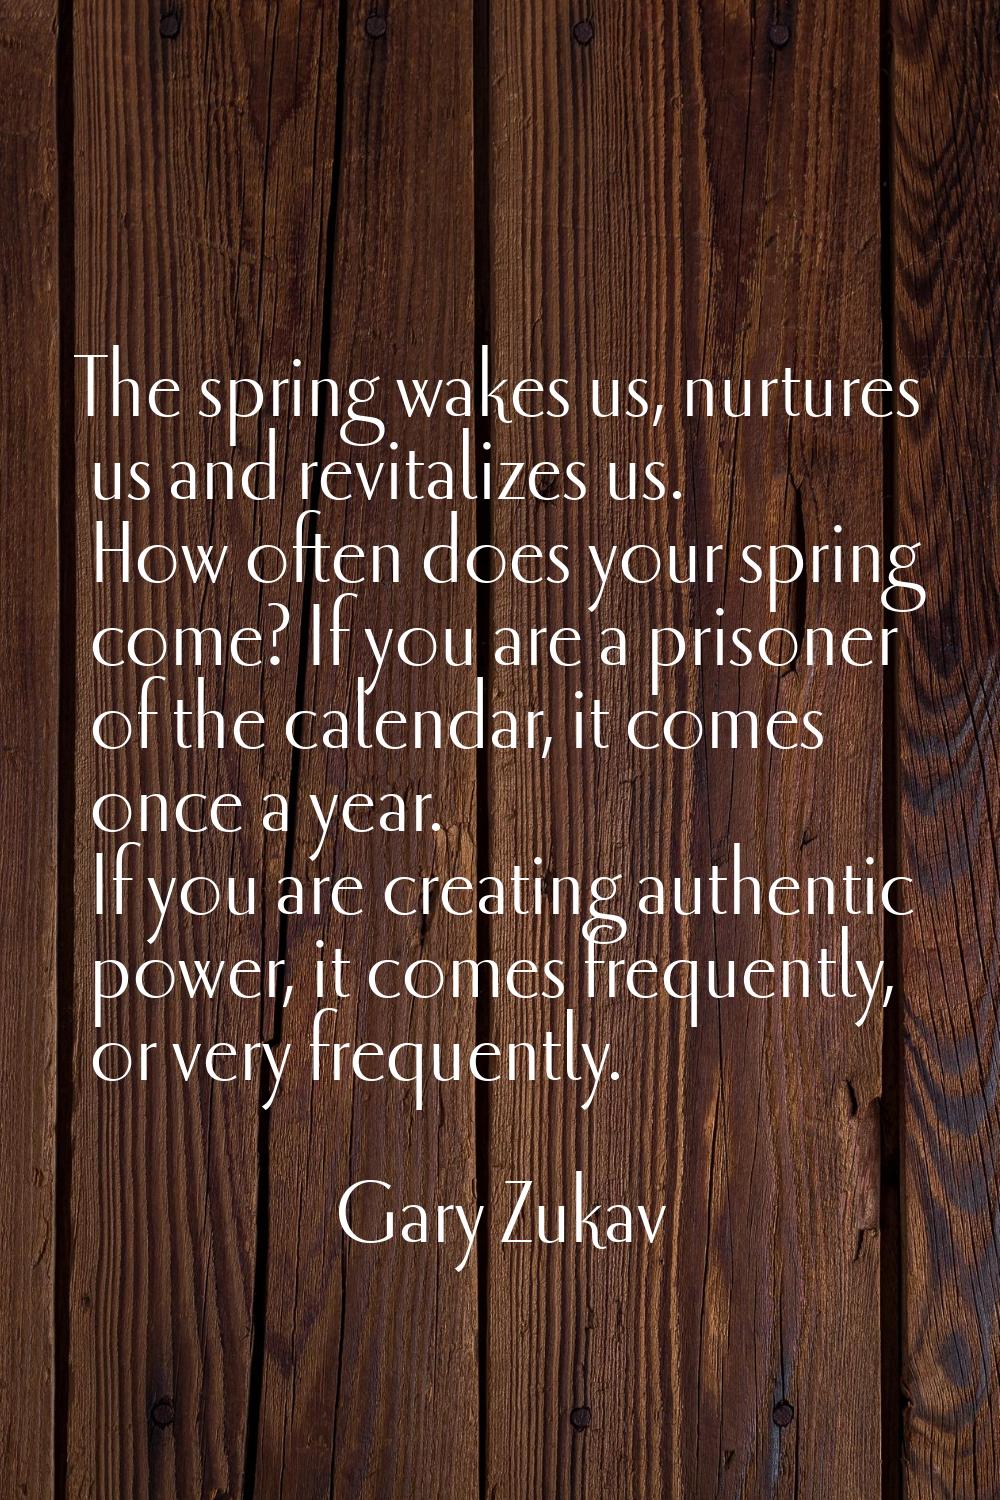 The spring wakes us, nurtures us and revitalizes us. How often does your spring come? If you are a 